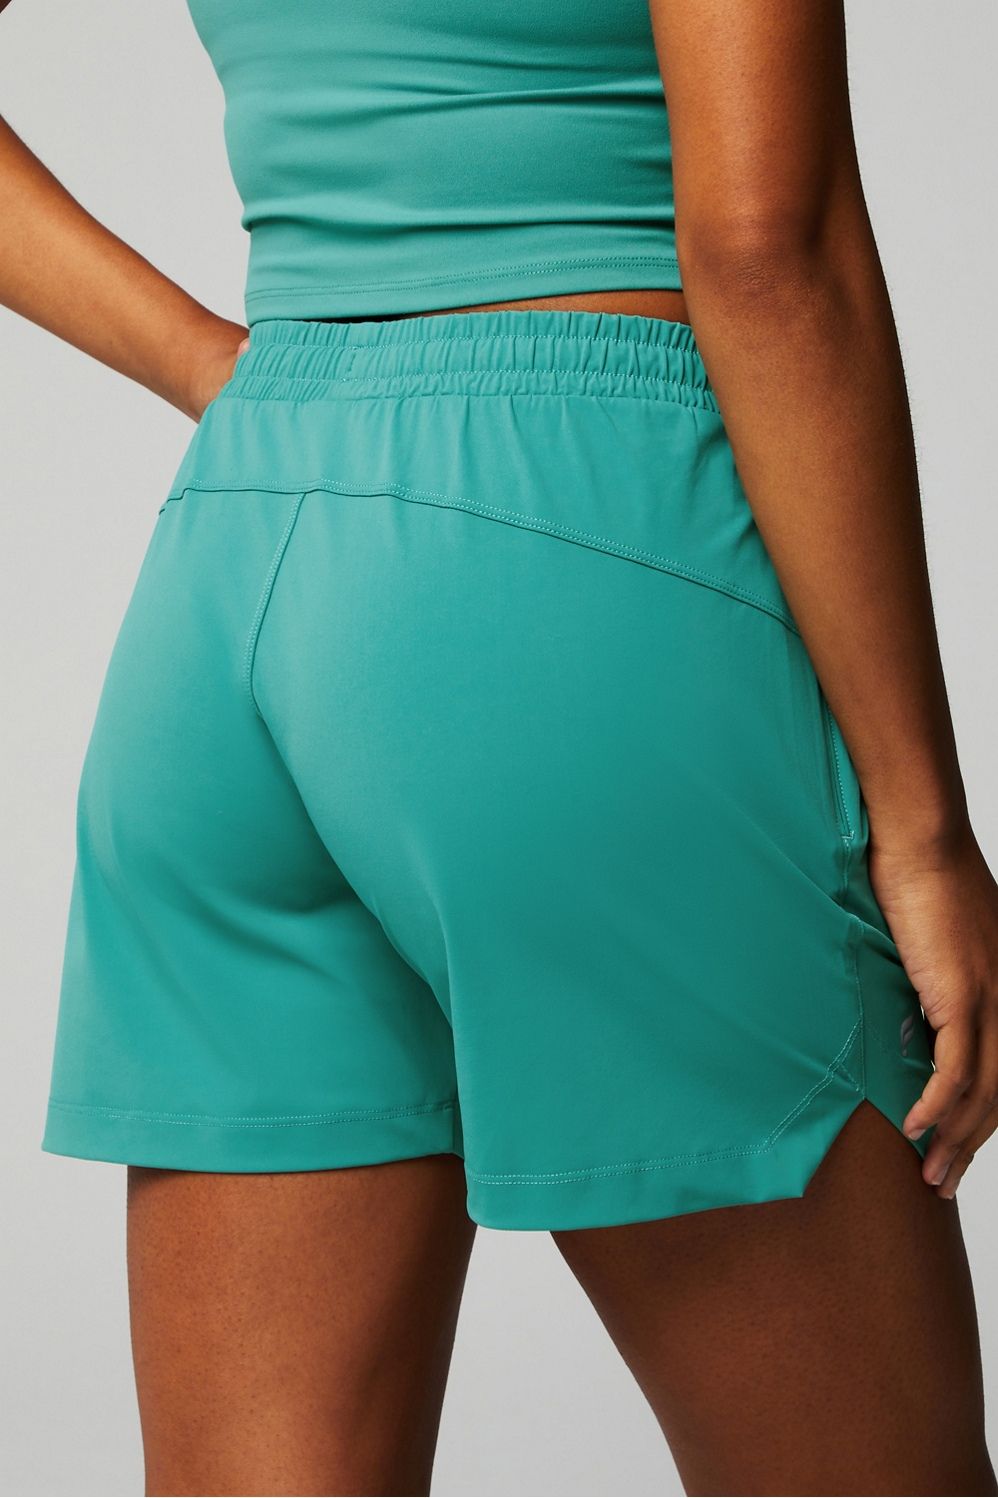 The One Short 5" - Women's | Fabletics - North America